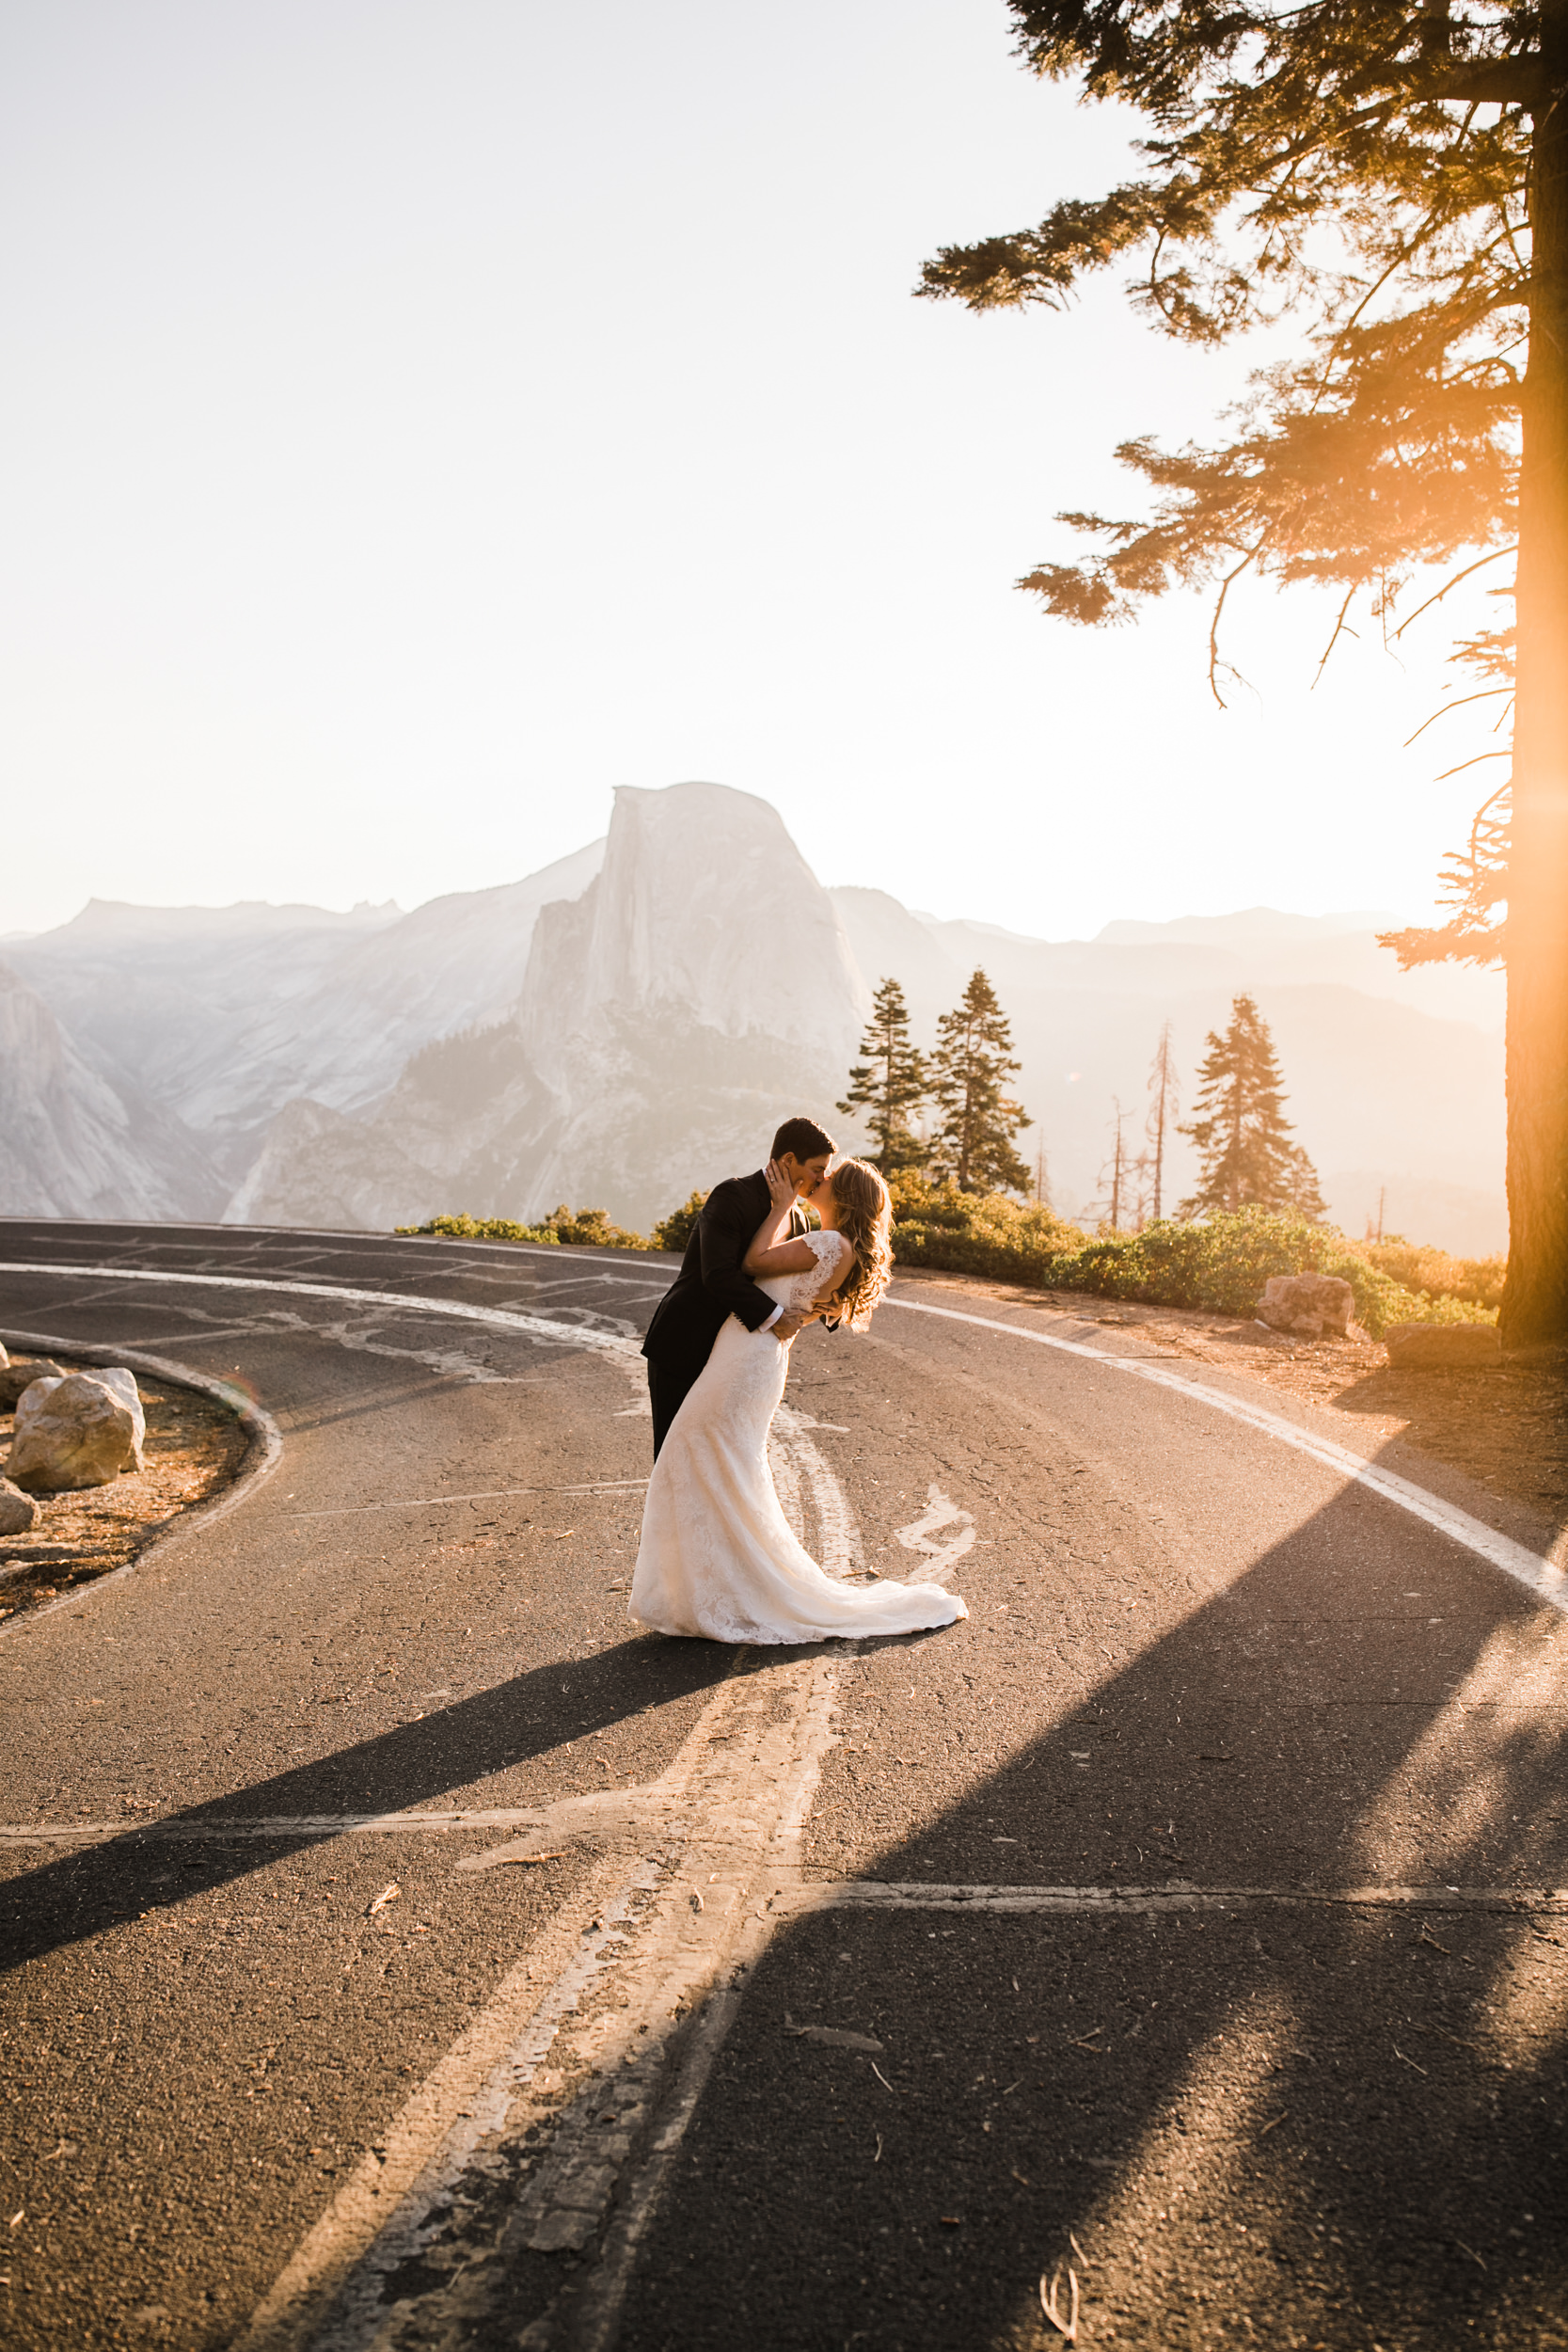 first look and wedding portraits at glacier point | bride and groom with a dog | yosemite national park elopement photographer | the hearnes adventure photography 